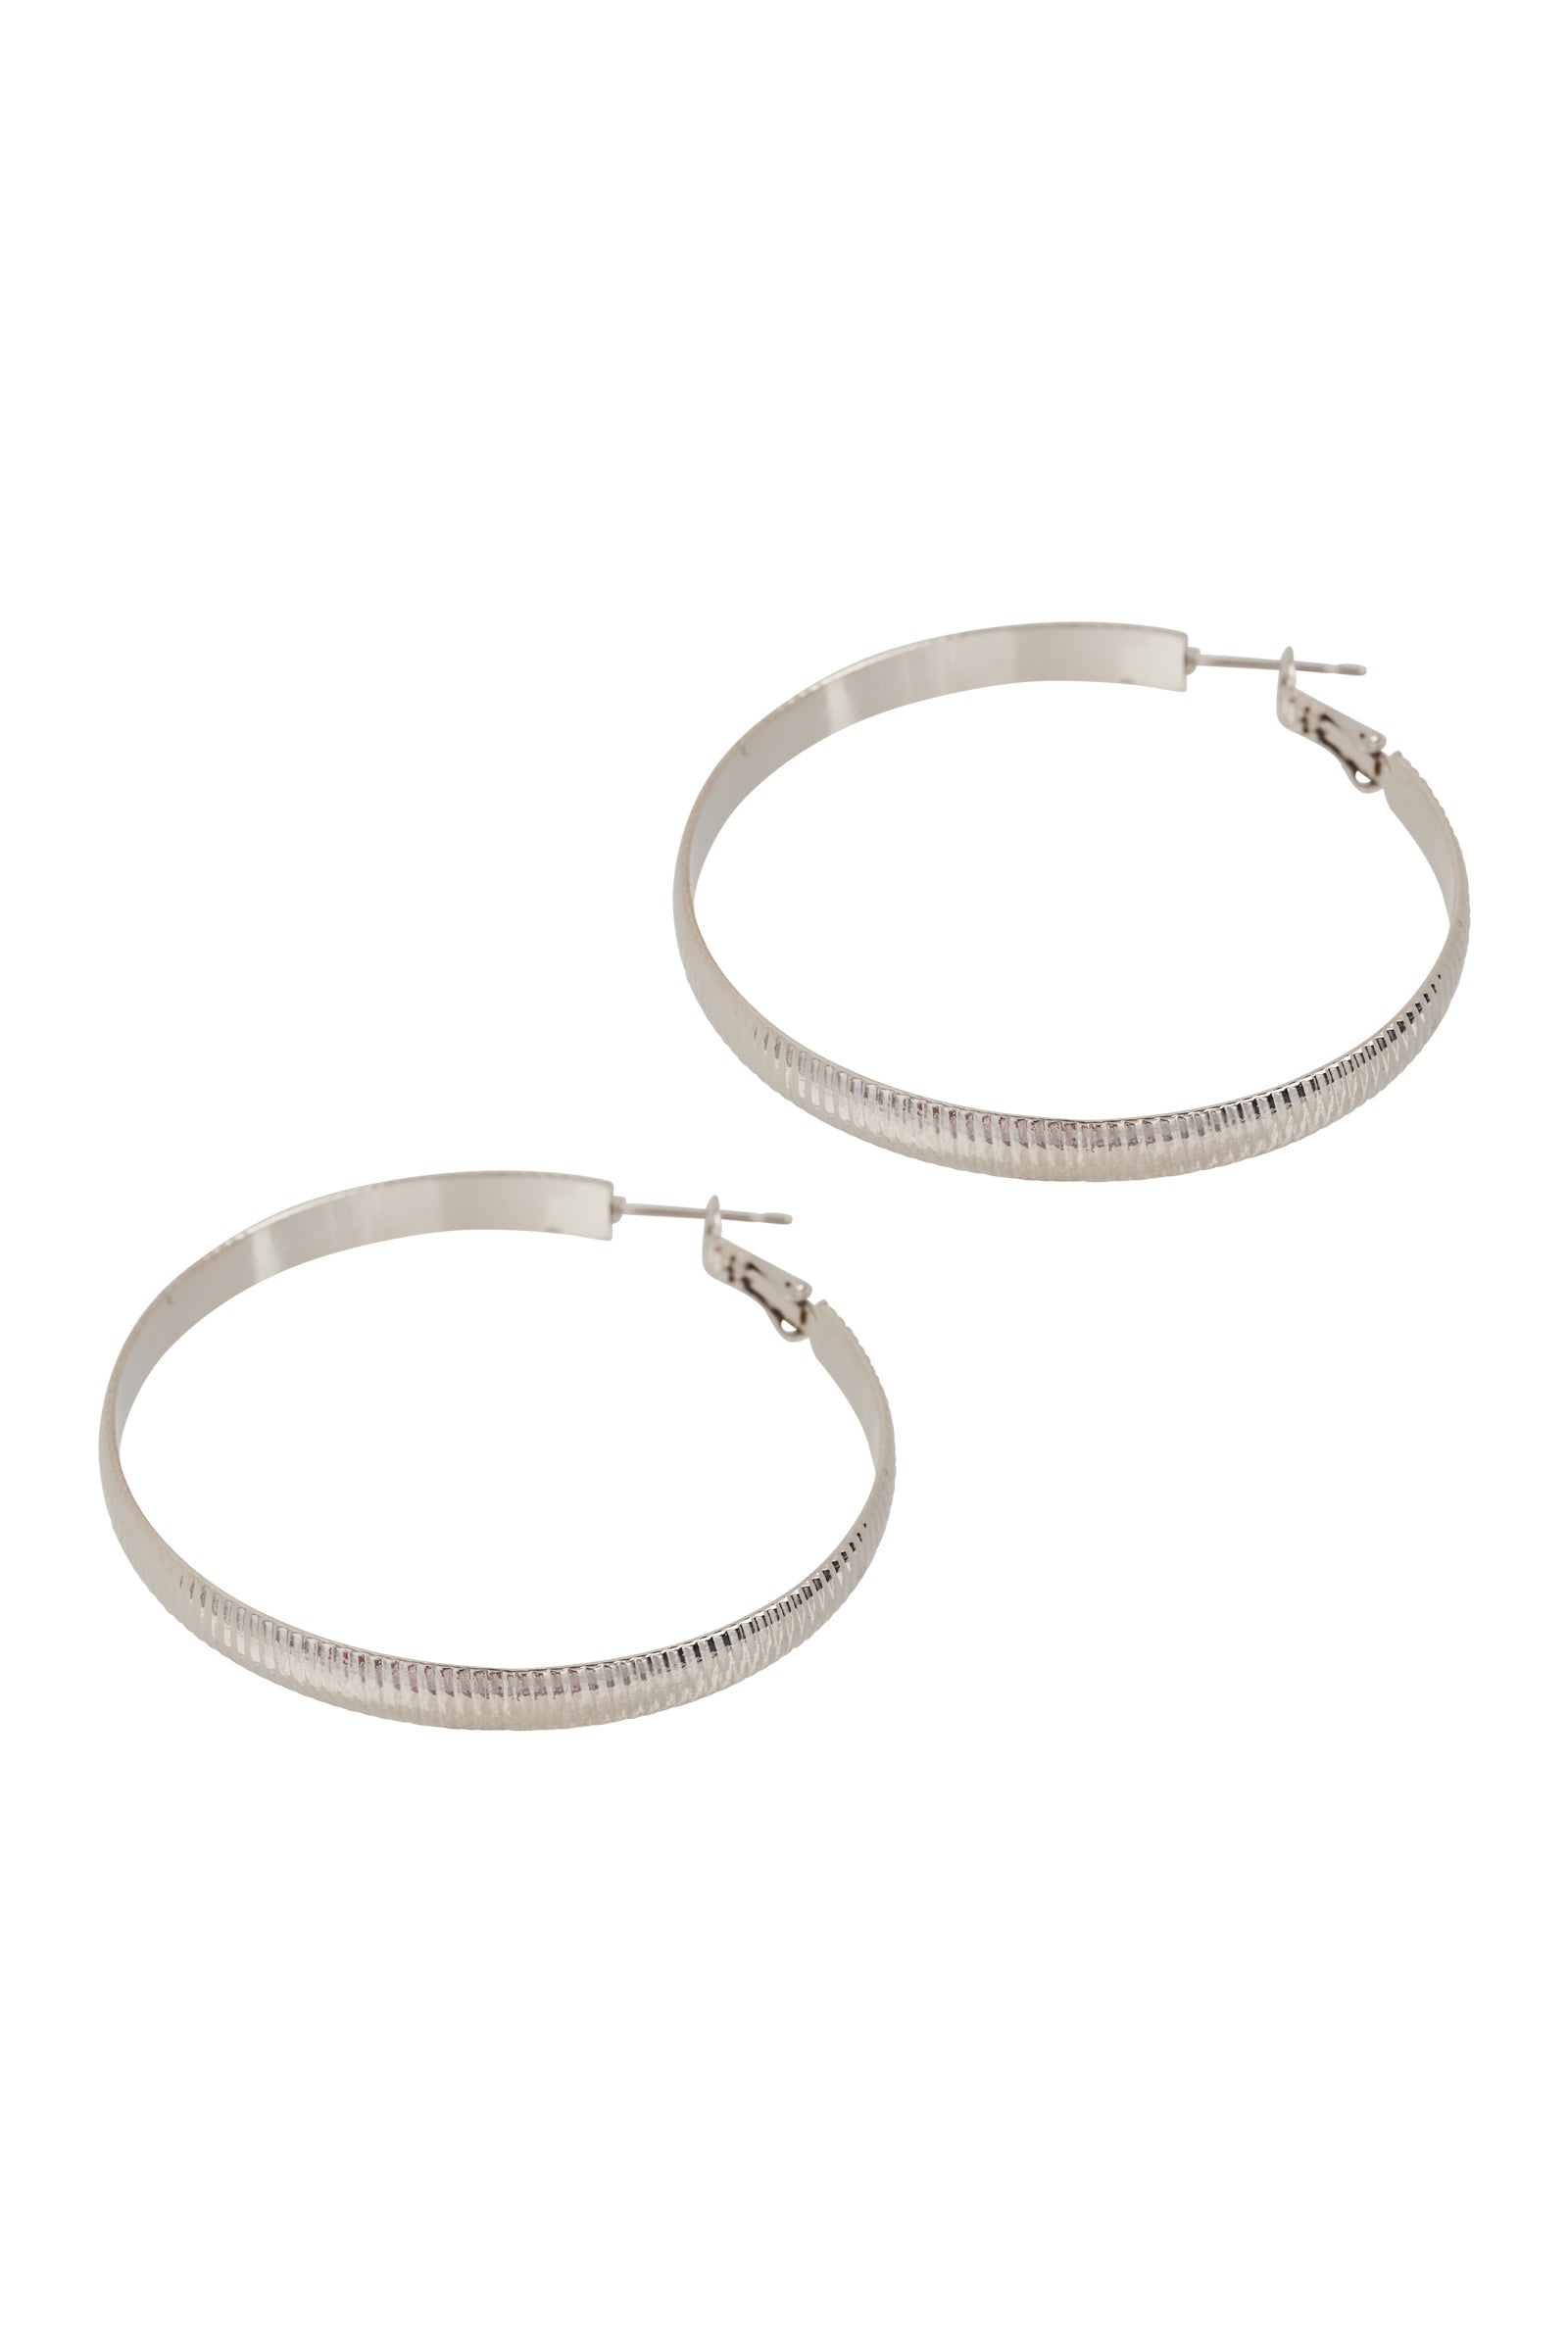 Norse Large Hoop - Silver - eb&ive Earring